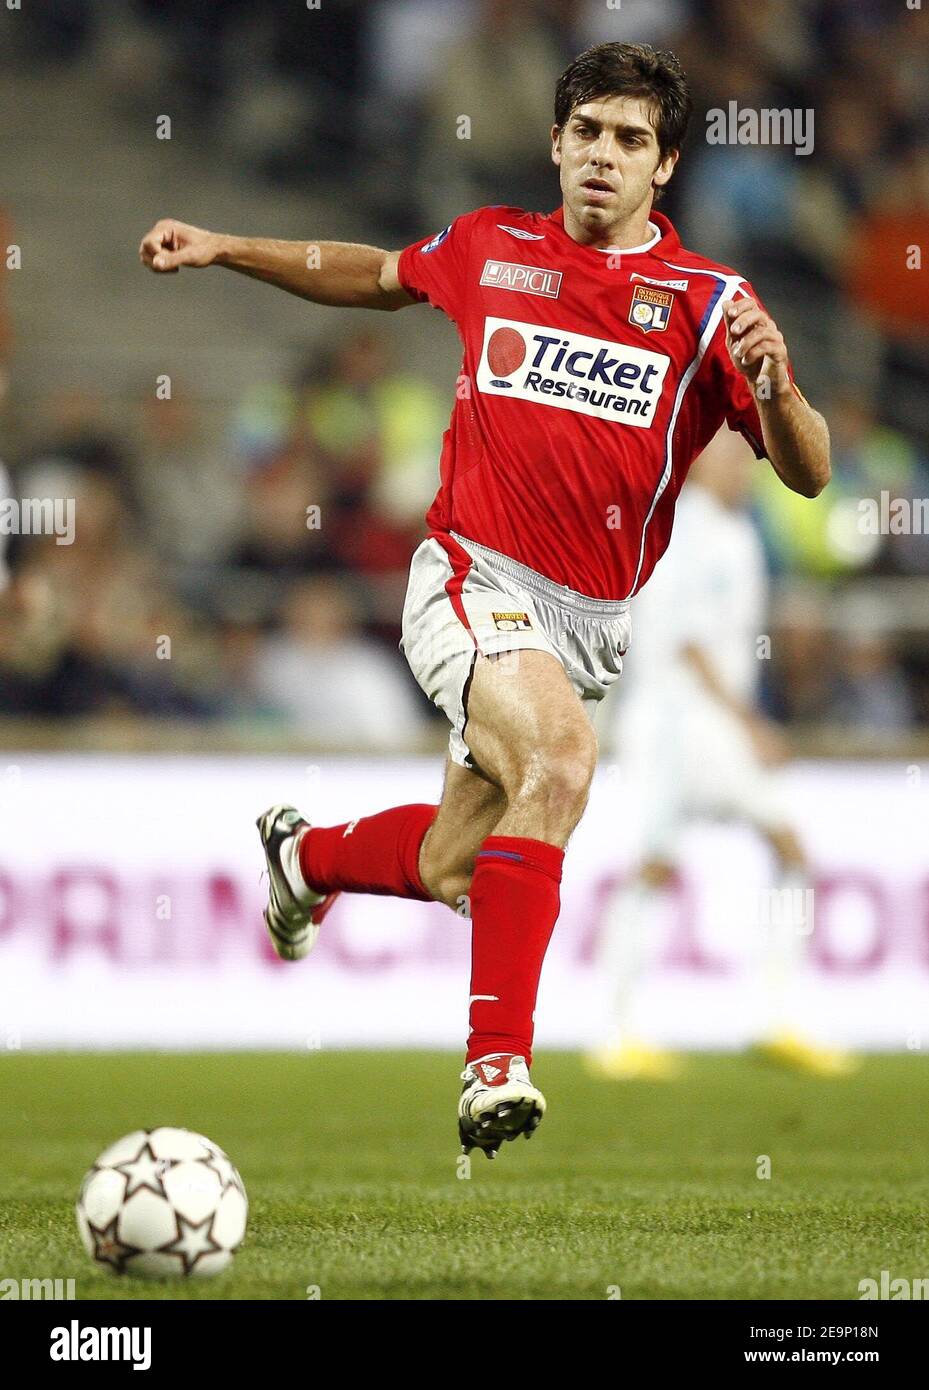 Lyon's Juninho in action during the French first league football match, Olympique de Marseille vs Olympique Lyonnais, at the Velodrome stadium, in Marseille, France, on October 22, 2006. Lyon won 4-1. Photo by Christian Liewig/ABACAPRESS.COM Stock Photo